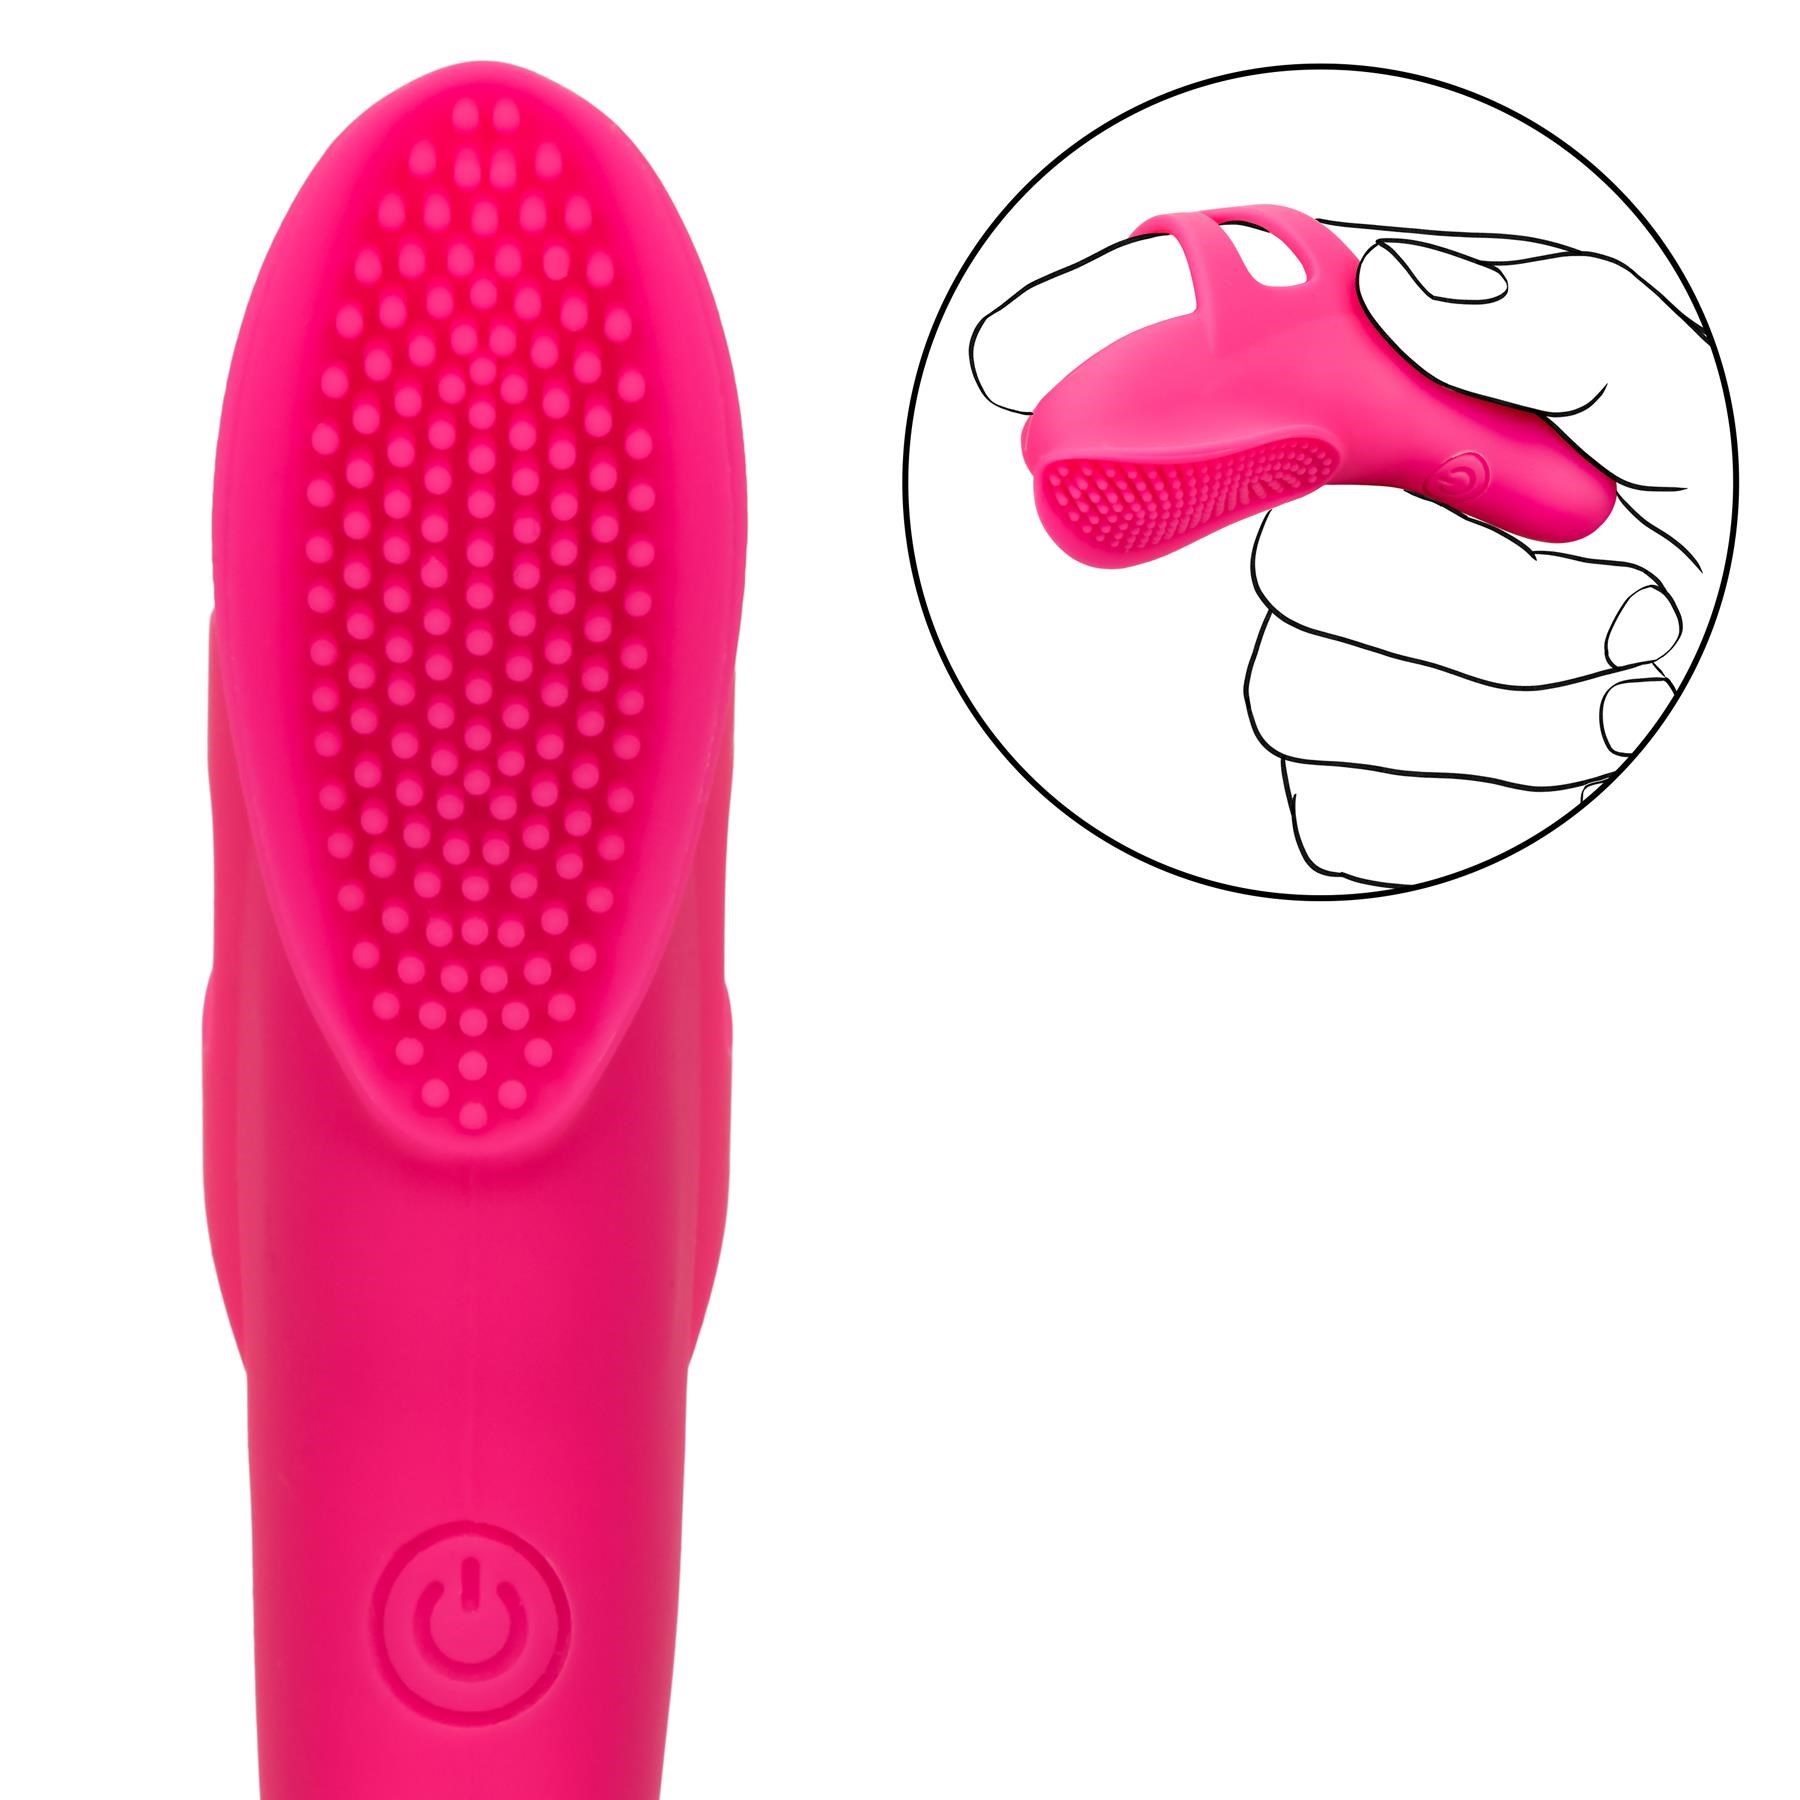 Neon Vibes The Nubby Finger Vibrator- Close Up on Nubby Tip